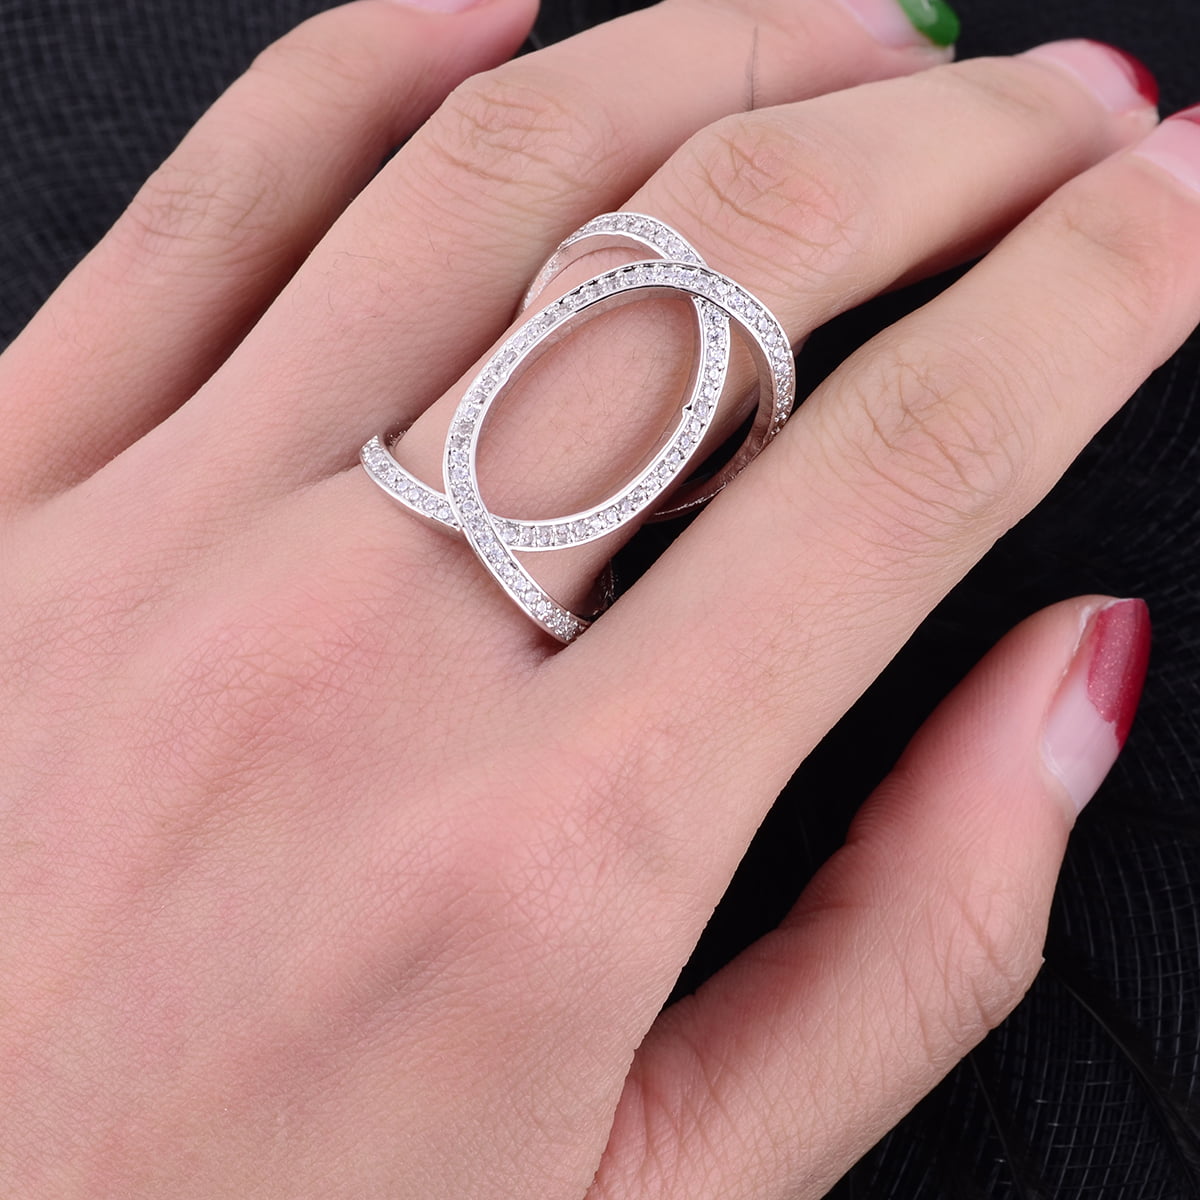 Vistashops - XOXO Diamond Crystal Rings In Rose Gold And Silver Tones